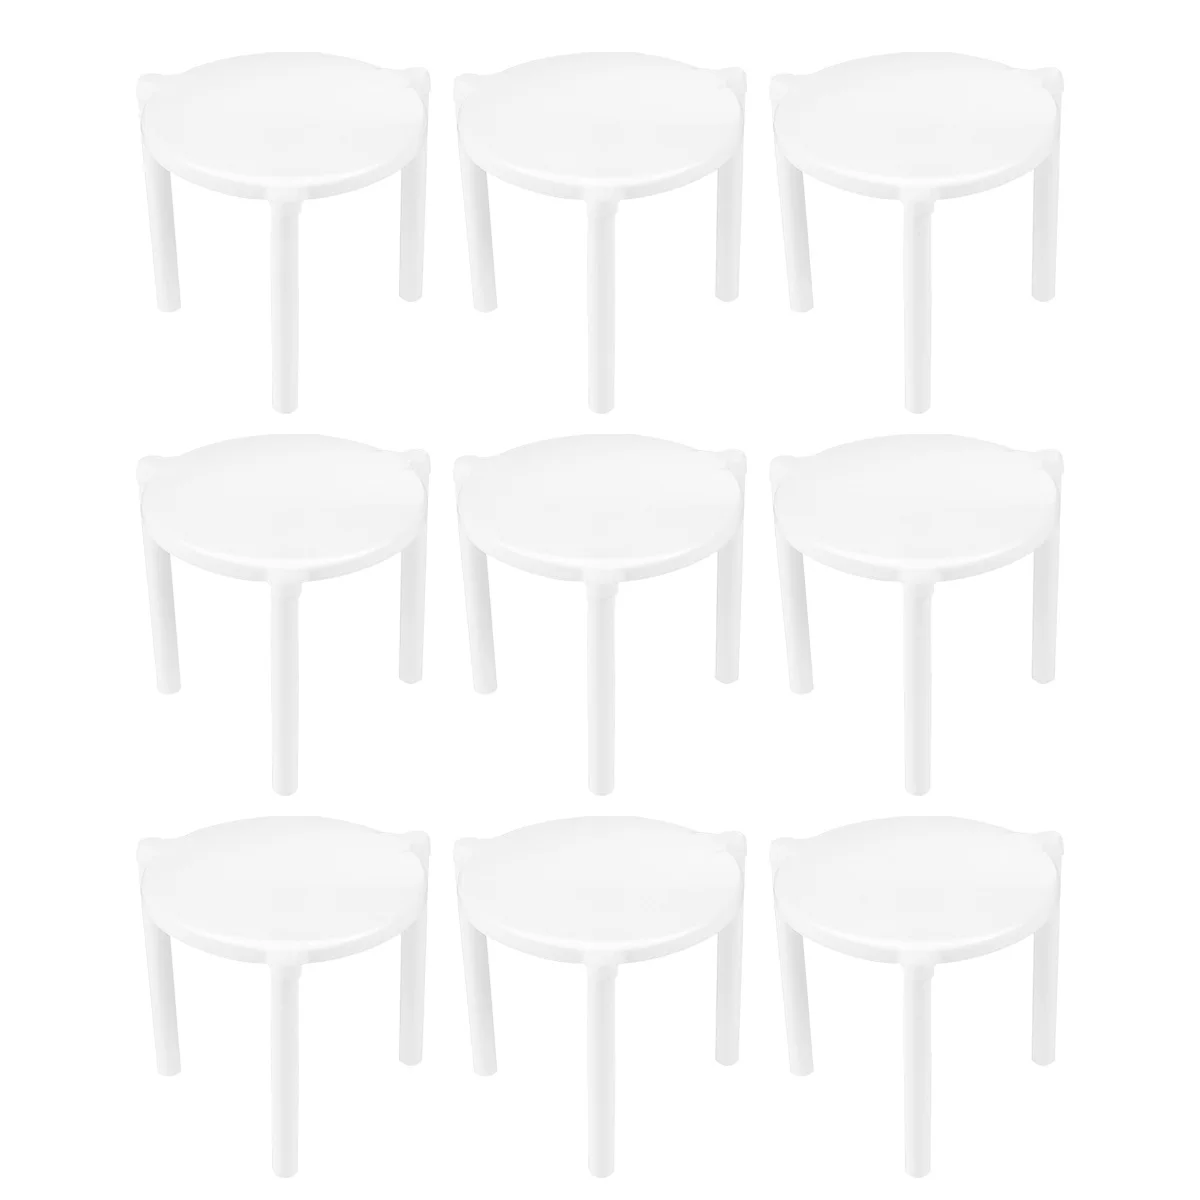 

Pizza Stand Saver Tripod Box Stacksupport Stands Table Tabletoptakeaway Takeout Tray Frame Tables Boxes Pie White Serving